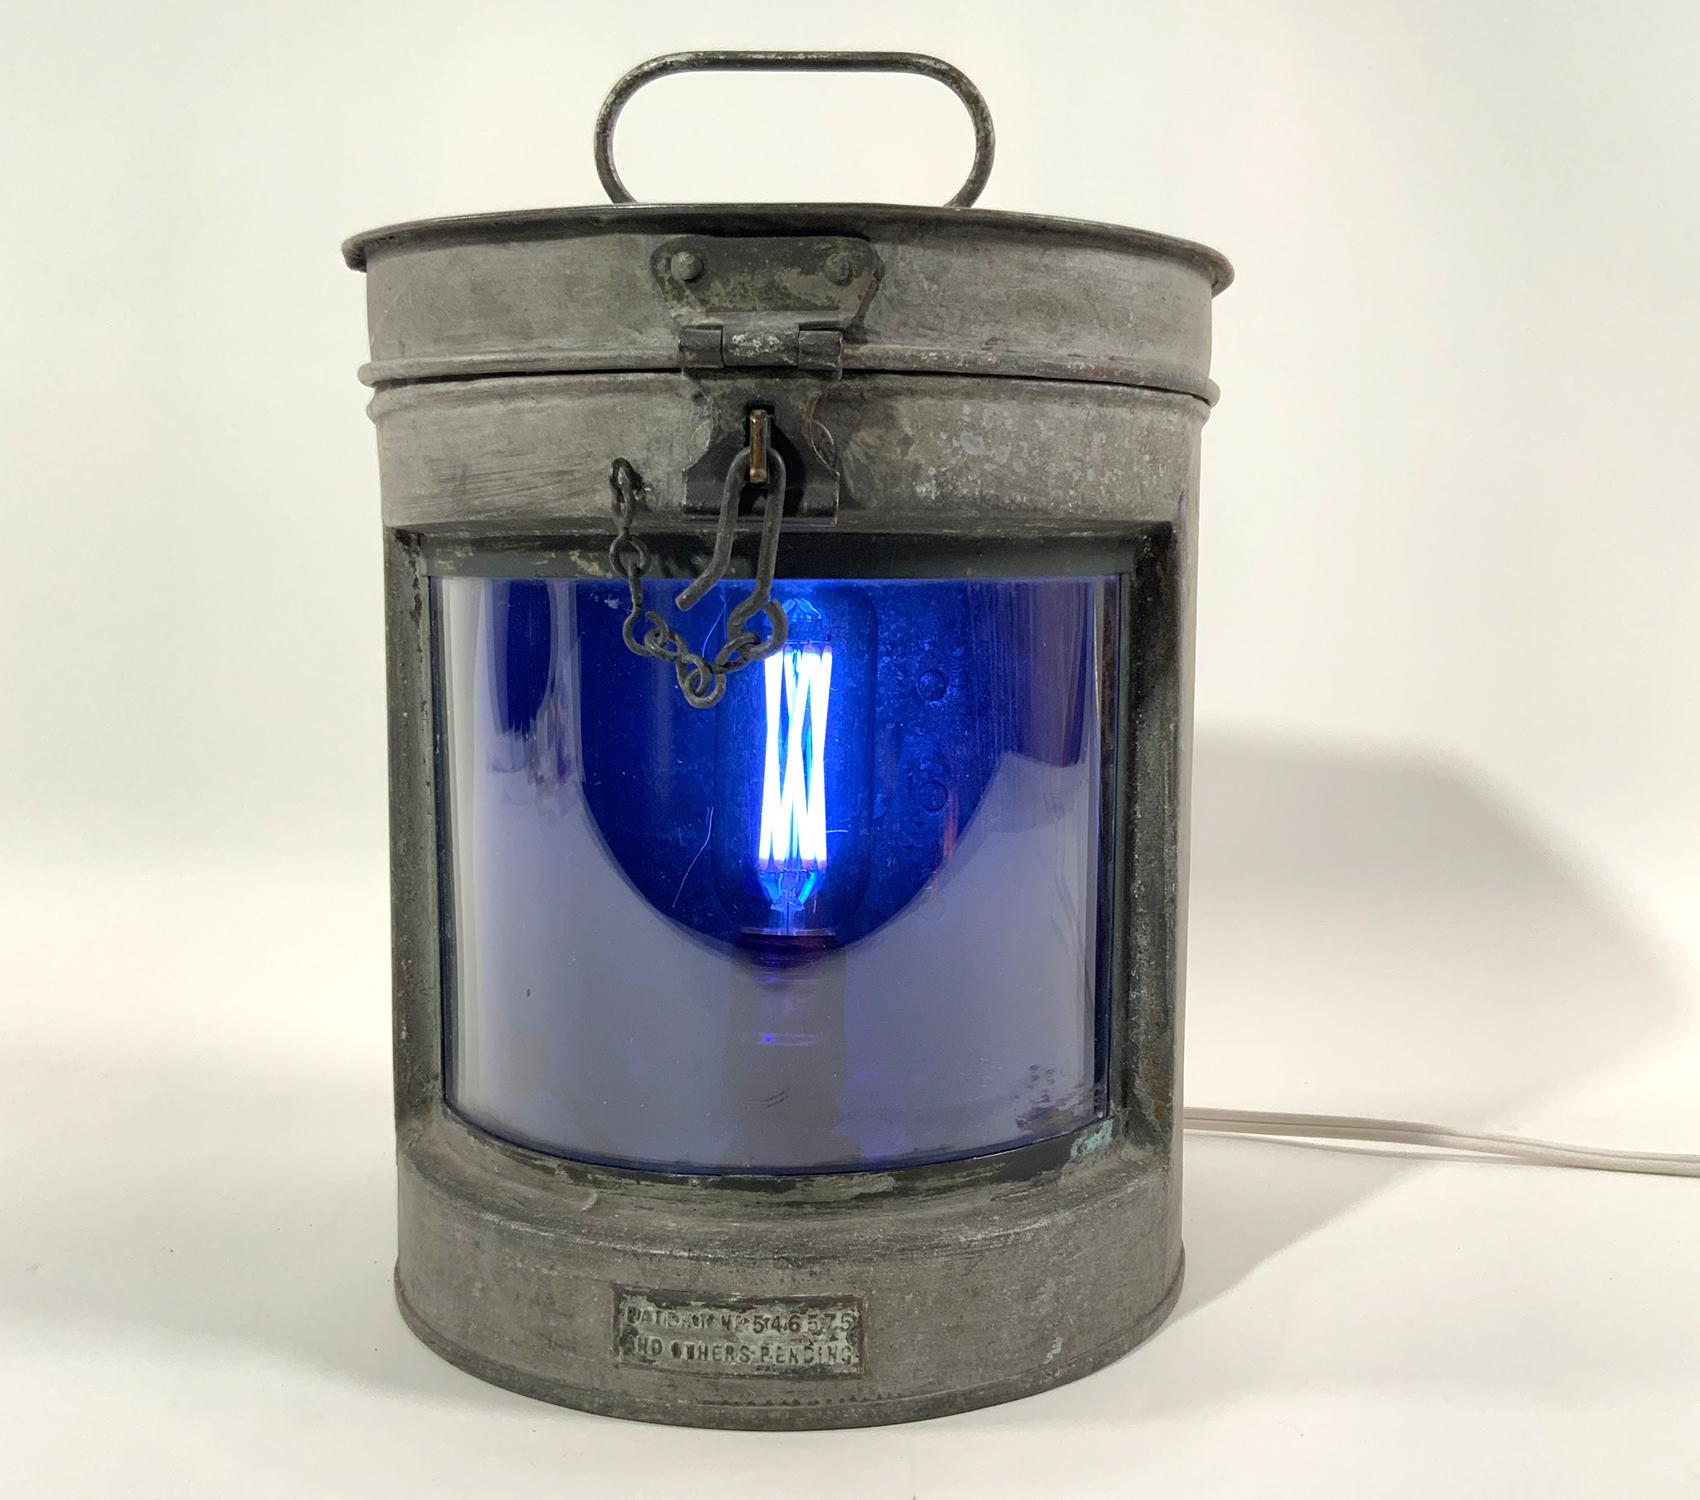 Meteorite ships lantern with curved cobalt blue lens, old original finish. Great patina. This is a choice antique lantern with hinged top and carry handle, embossed plate marked 